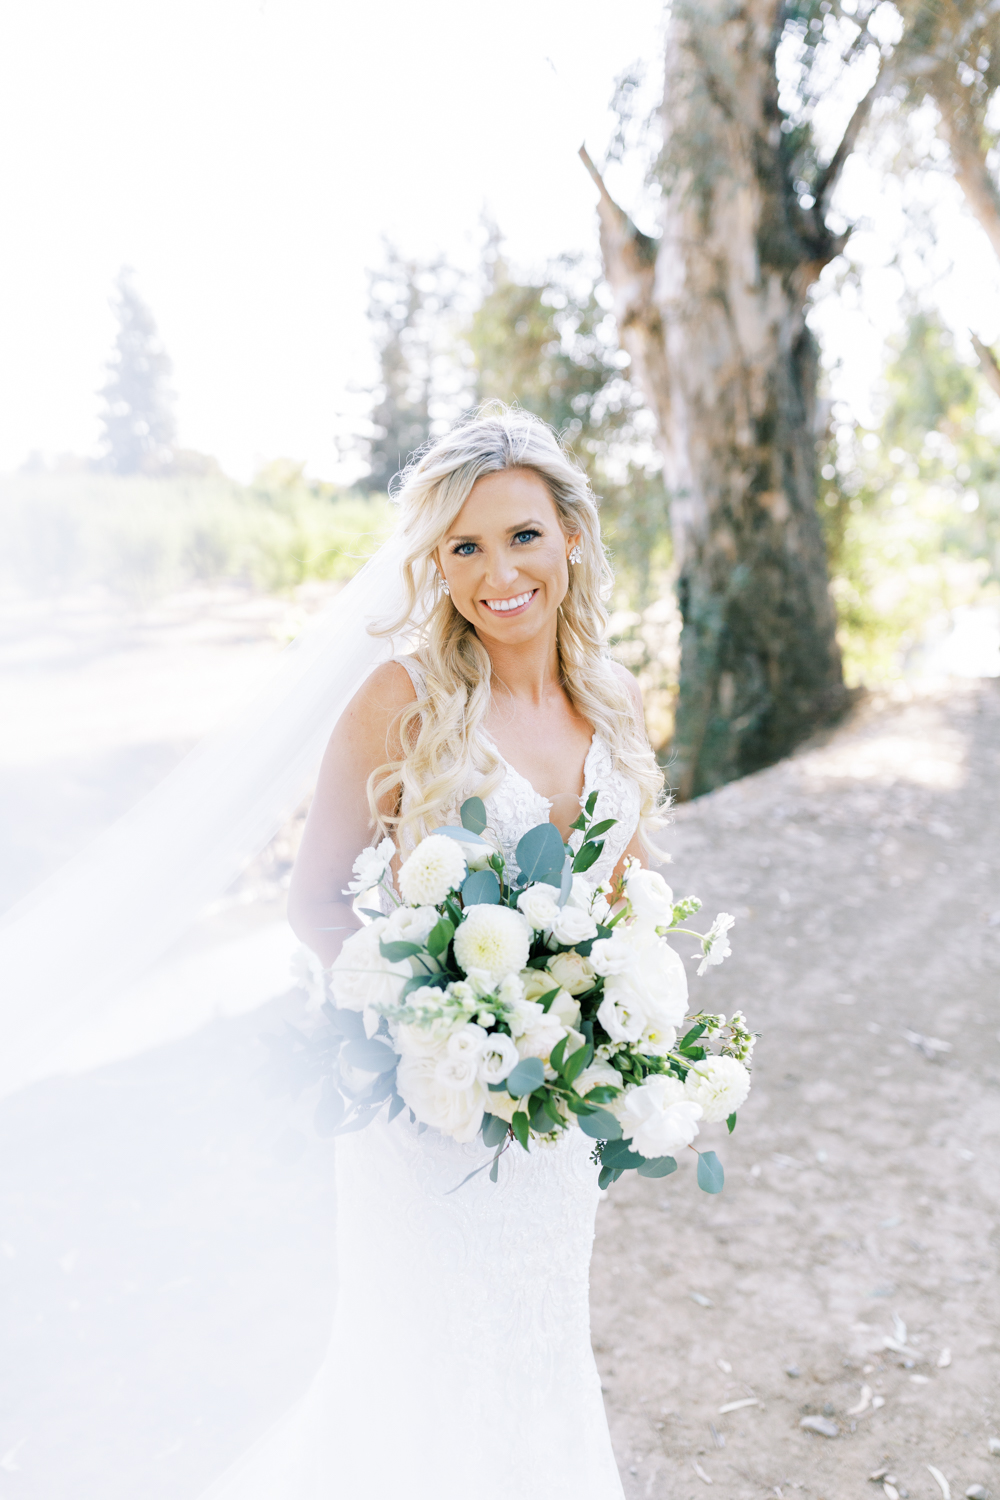 bride holding white and green wedding bouquet and smiling with wedding veil blowing